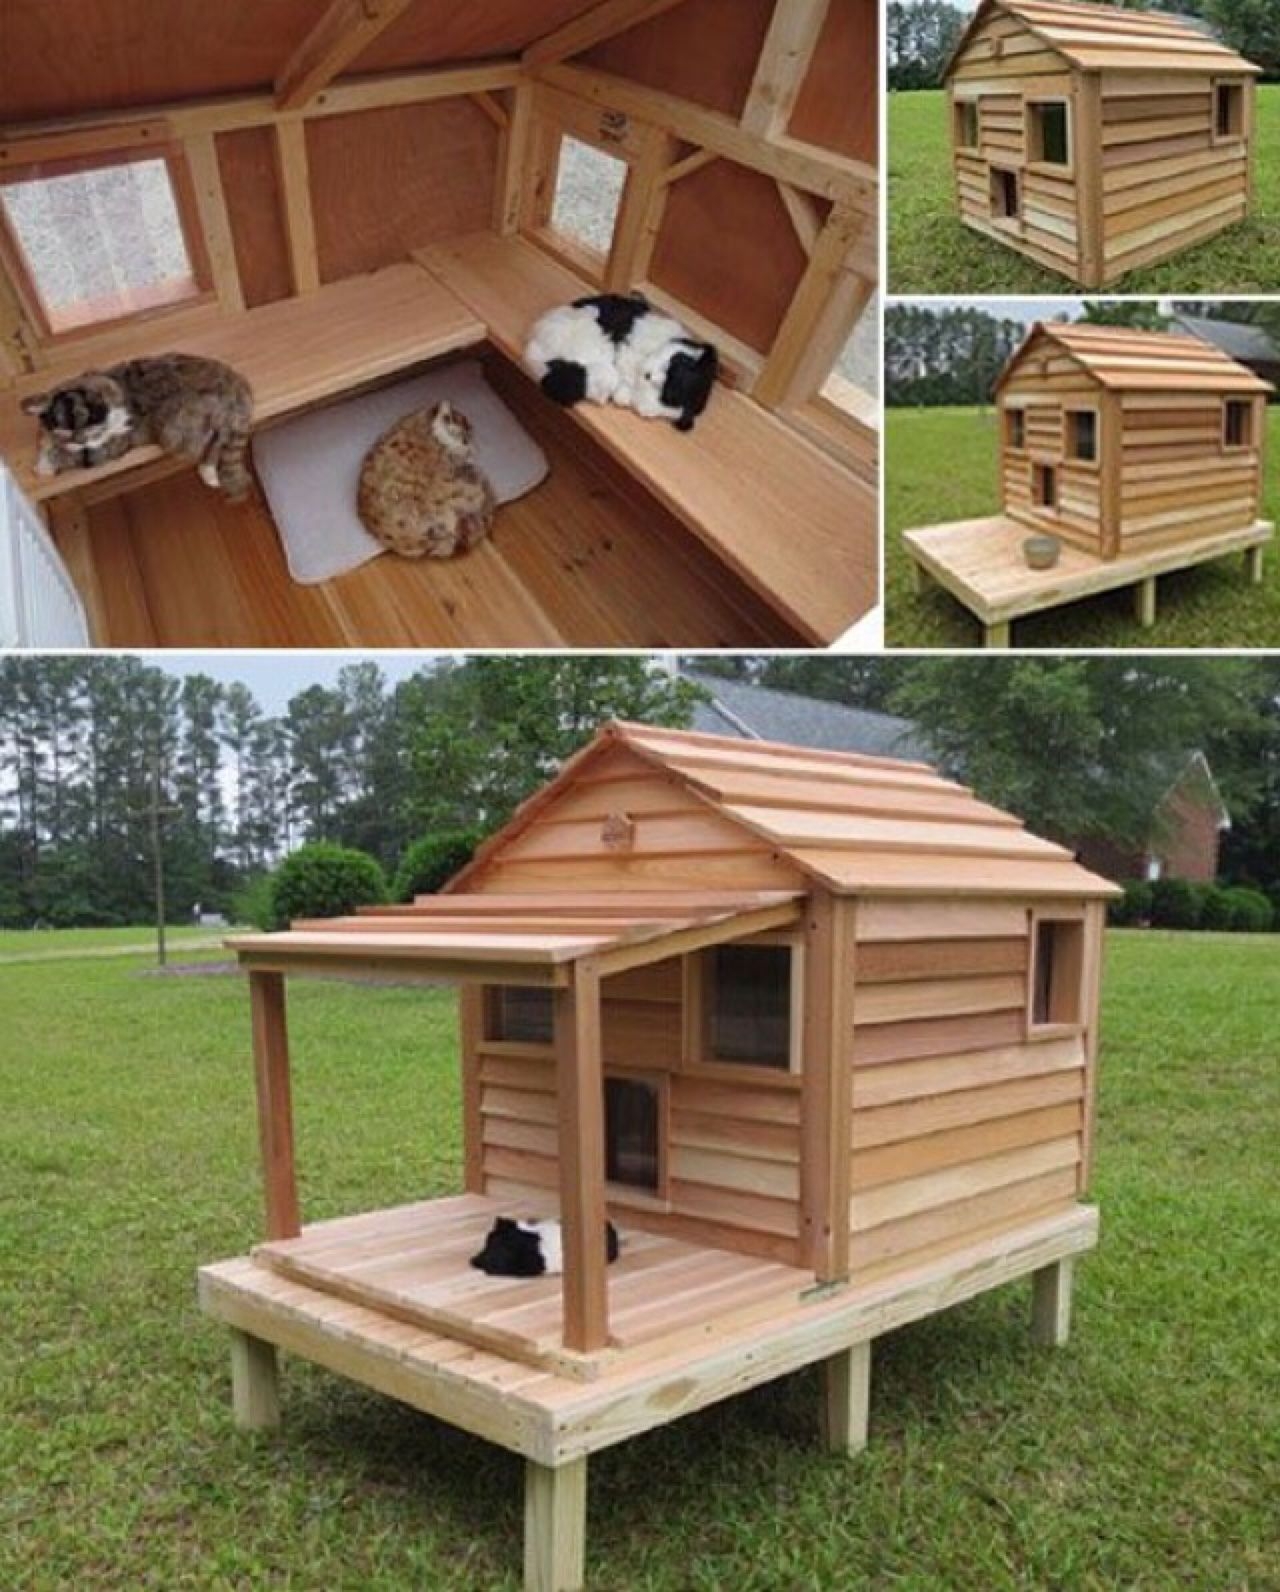 PETSITE Pet Dog House Wooden Dog Room Shelter Weatherproof Puppy House Condo Room with Platform Feral Insulated Pet House Log Cabin 